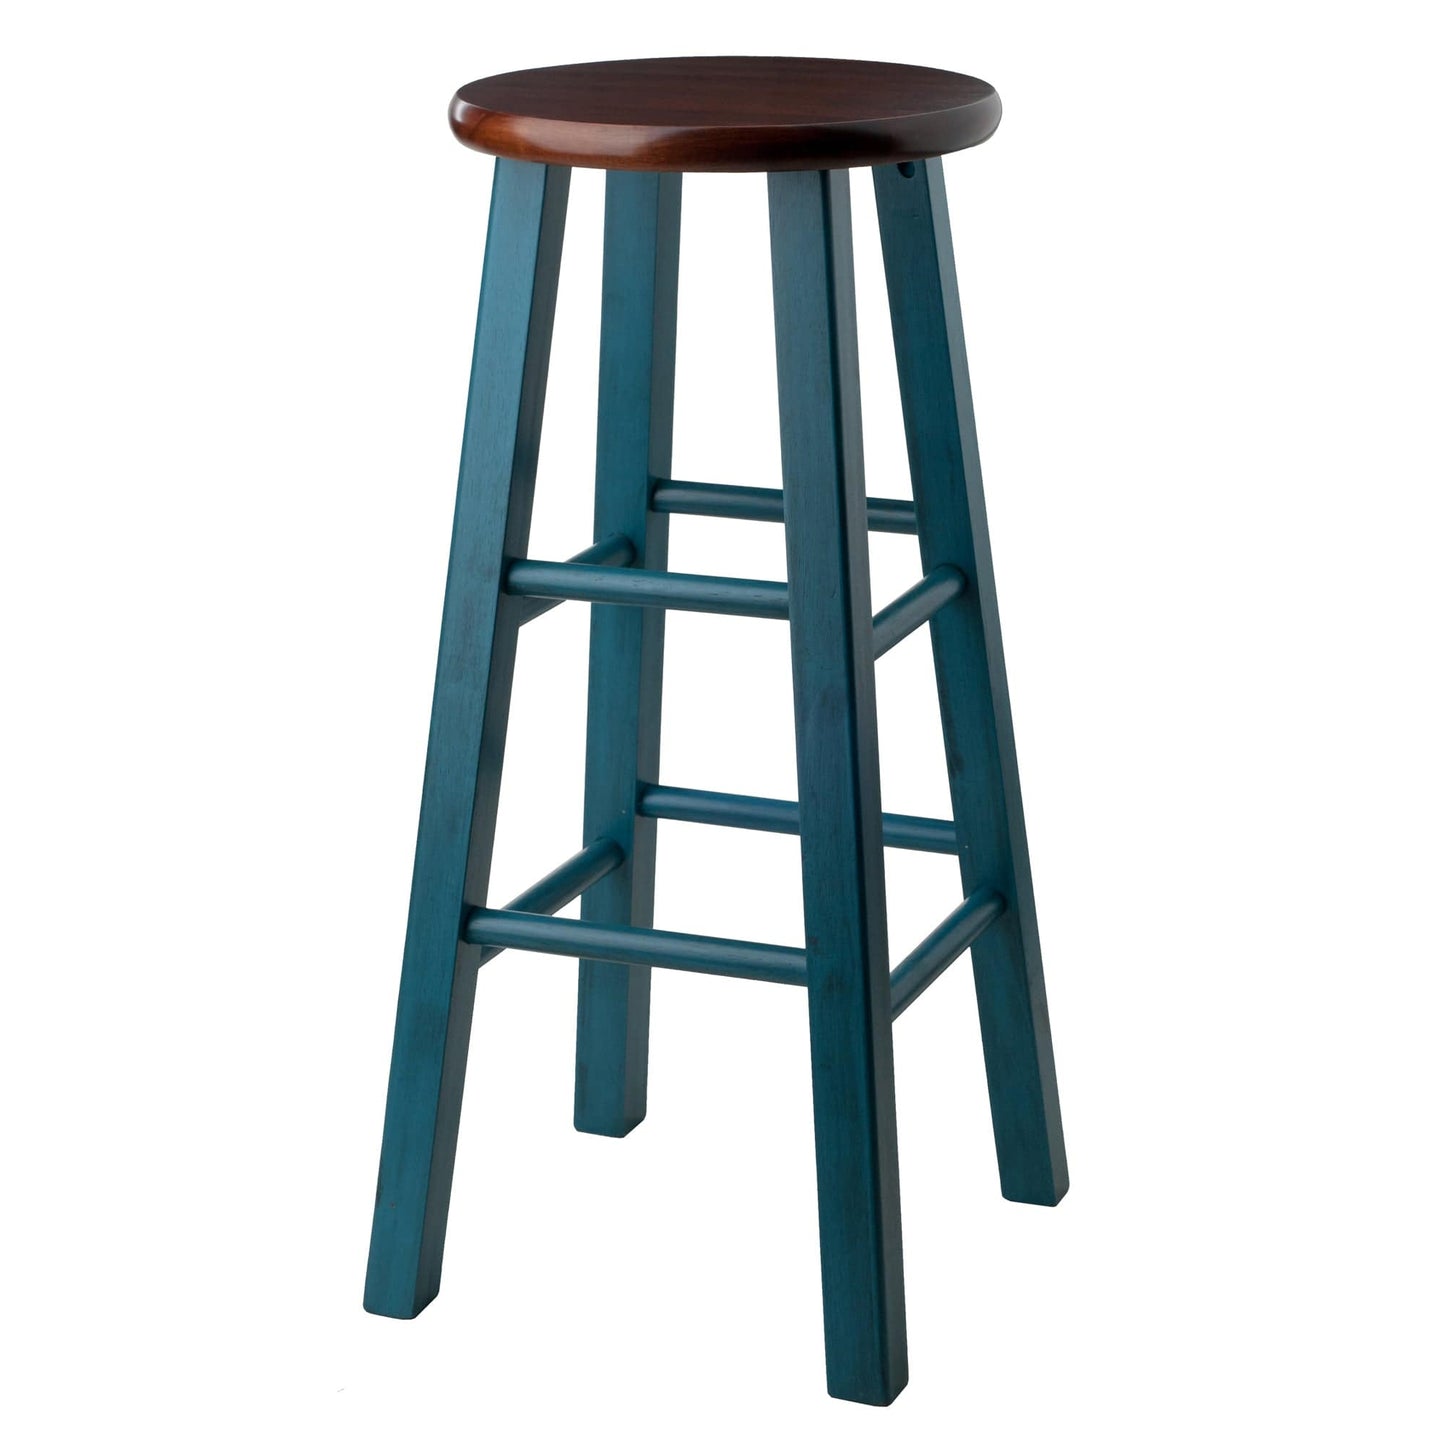 WINSOME Stool Ivy Bar Stool, Rustic Teal and Walnut